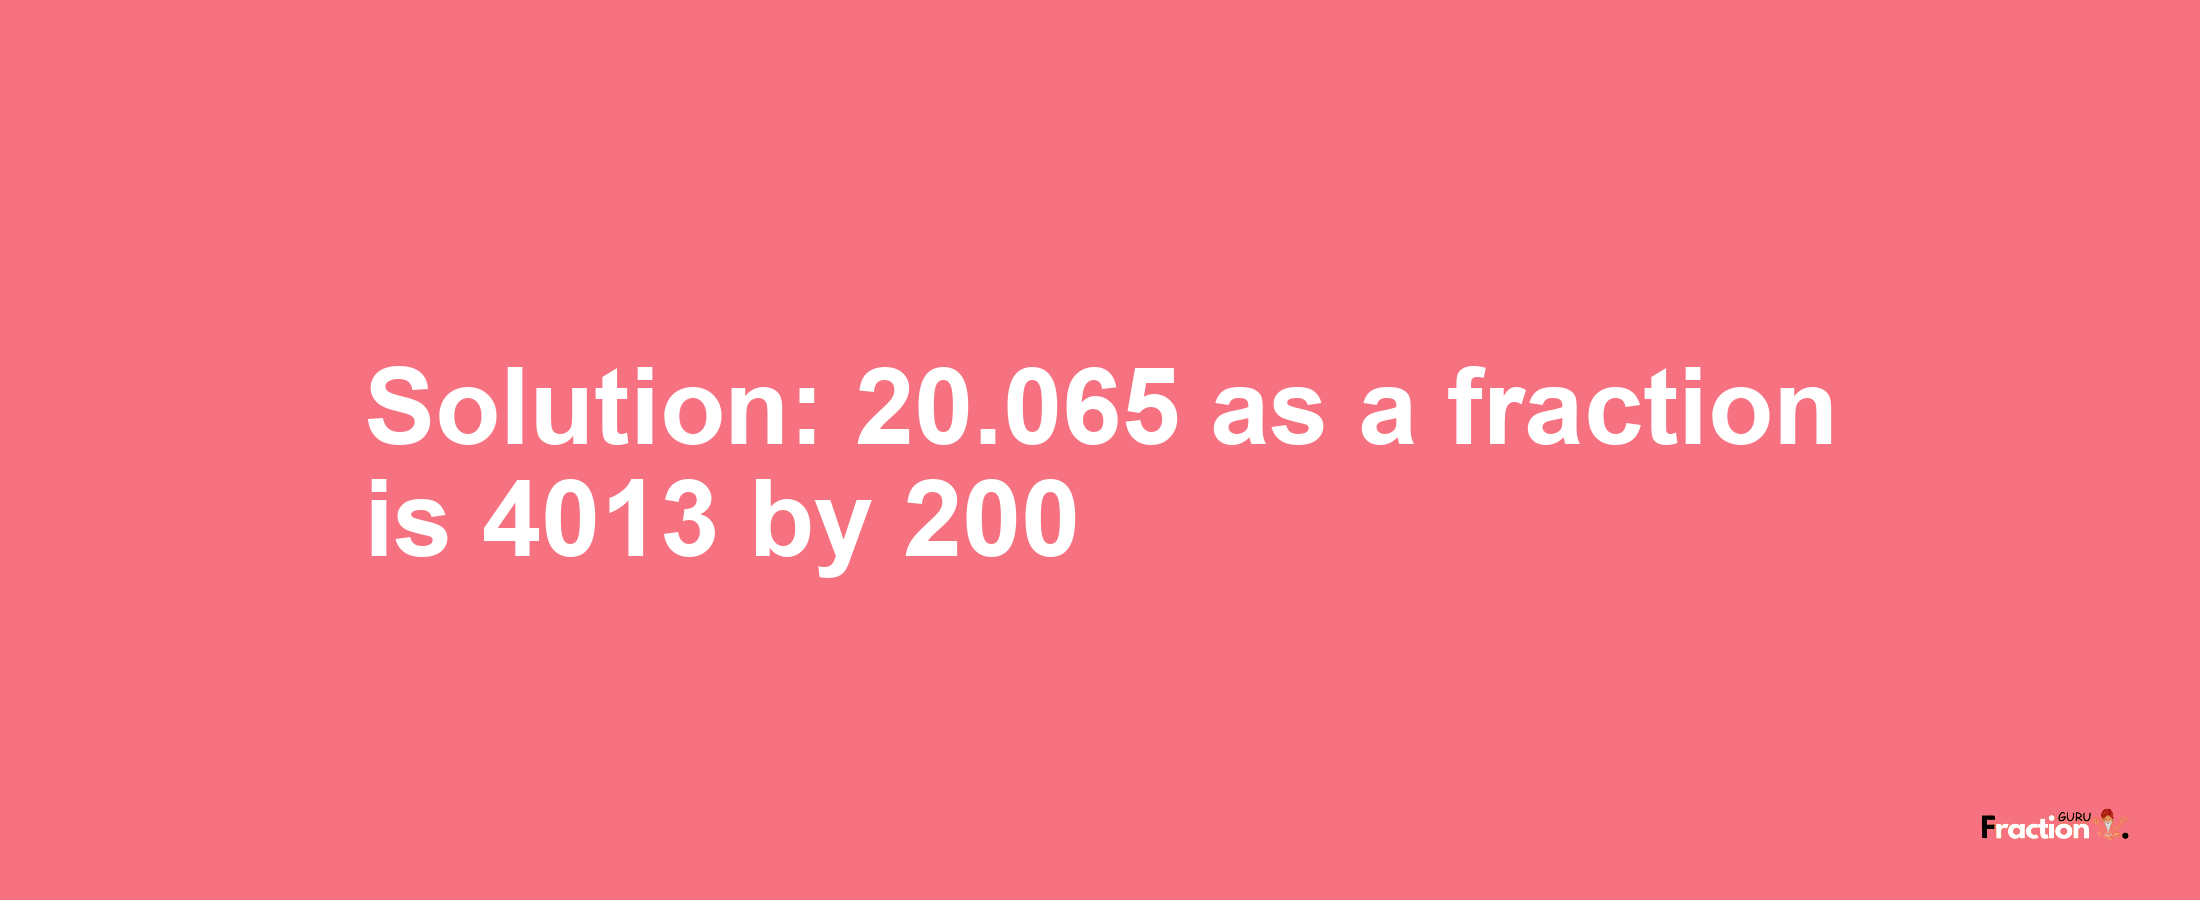 Solution:20.065 as a fraction is 4013/200